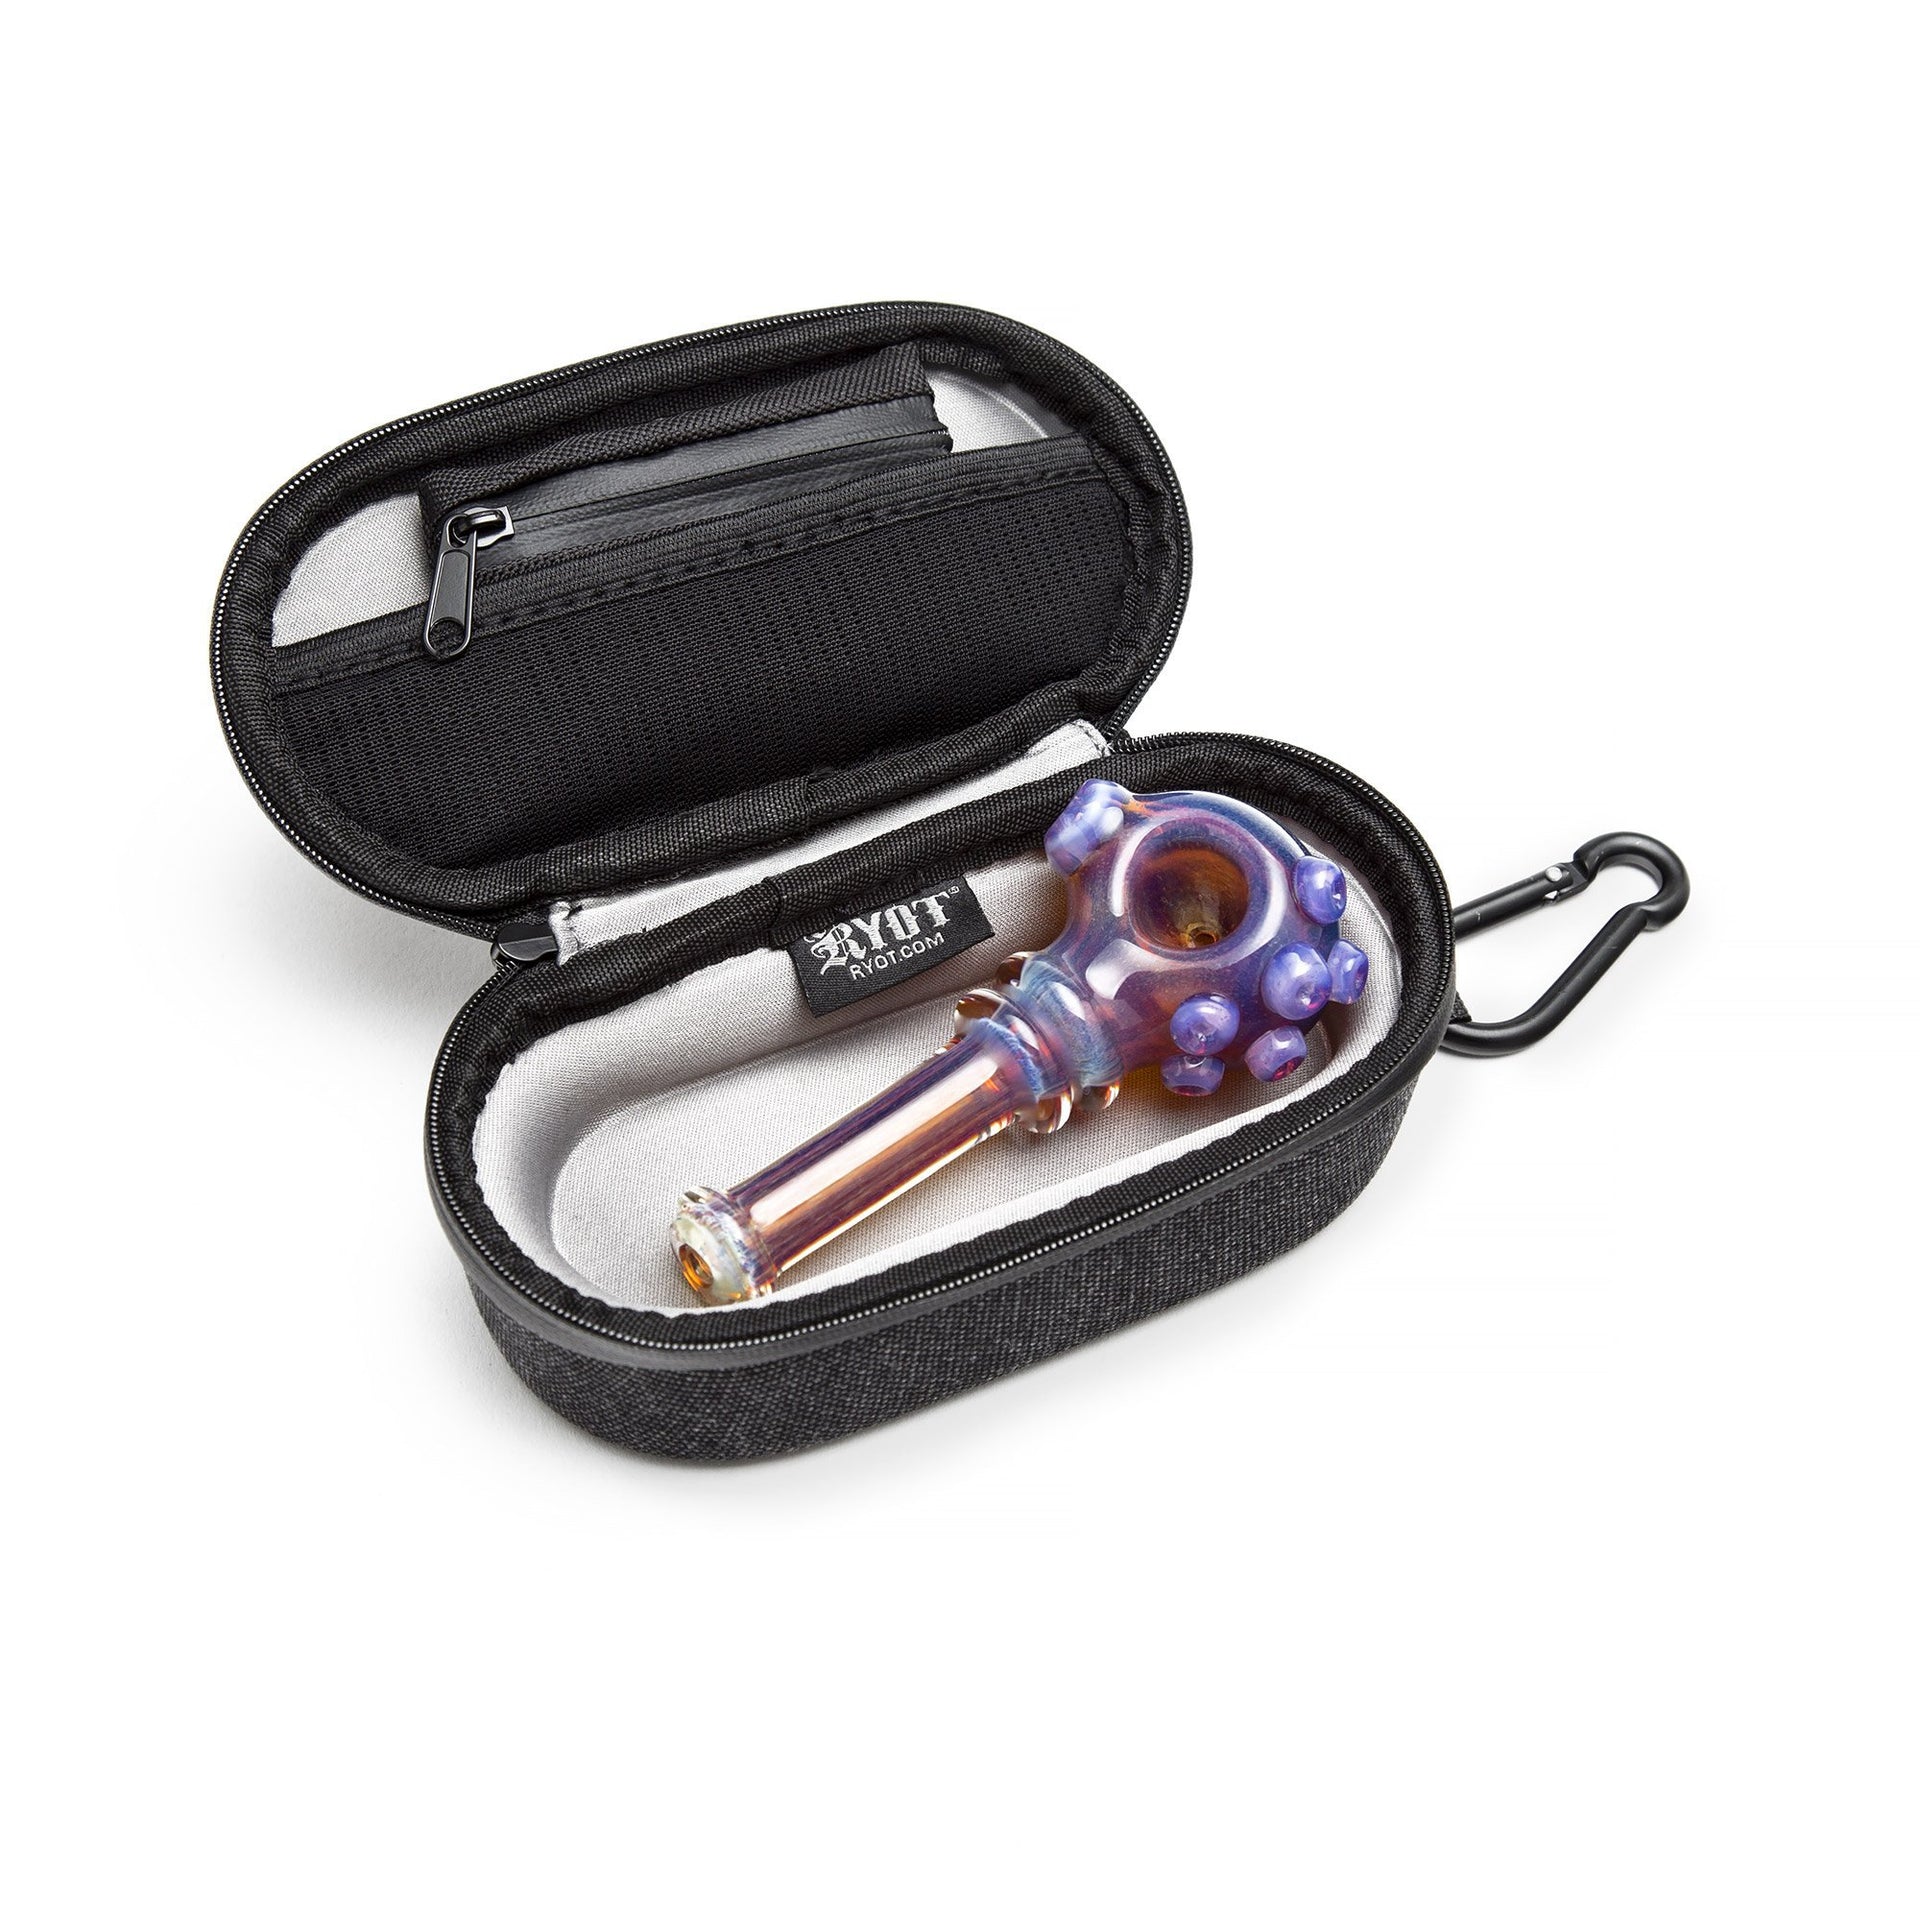 RYOT SmellSafe Carbon Series HeadCase - 420 Science - The most trusted online smoke shop.